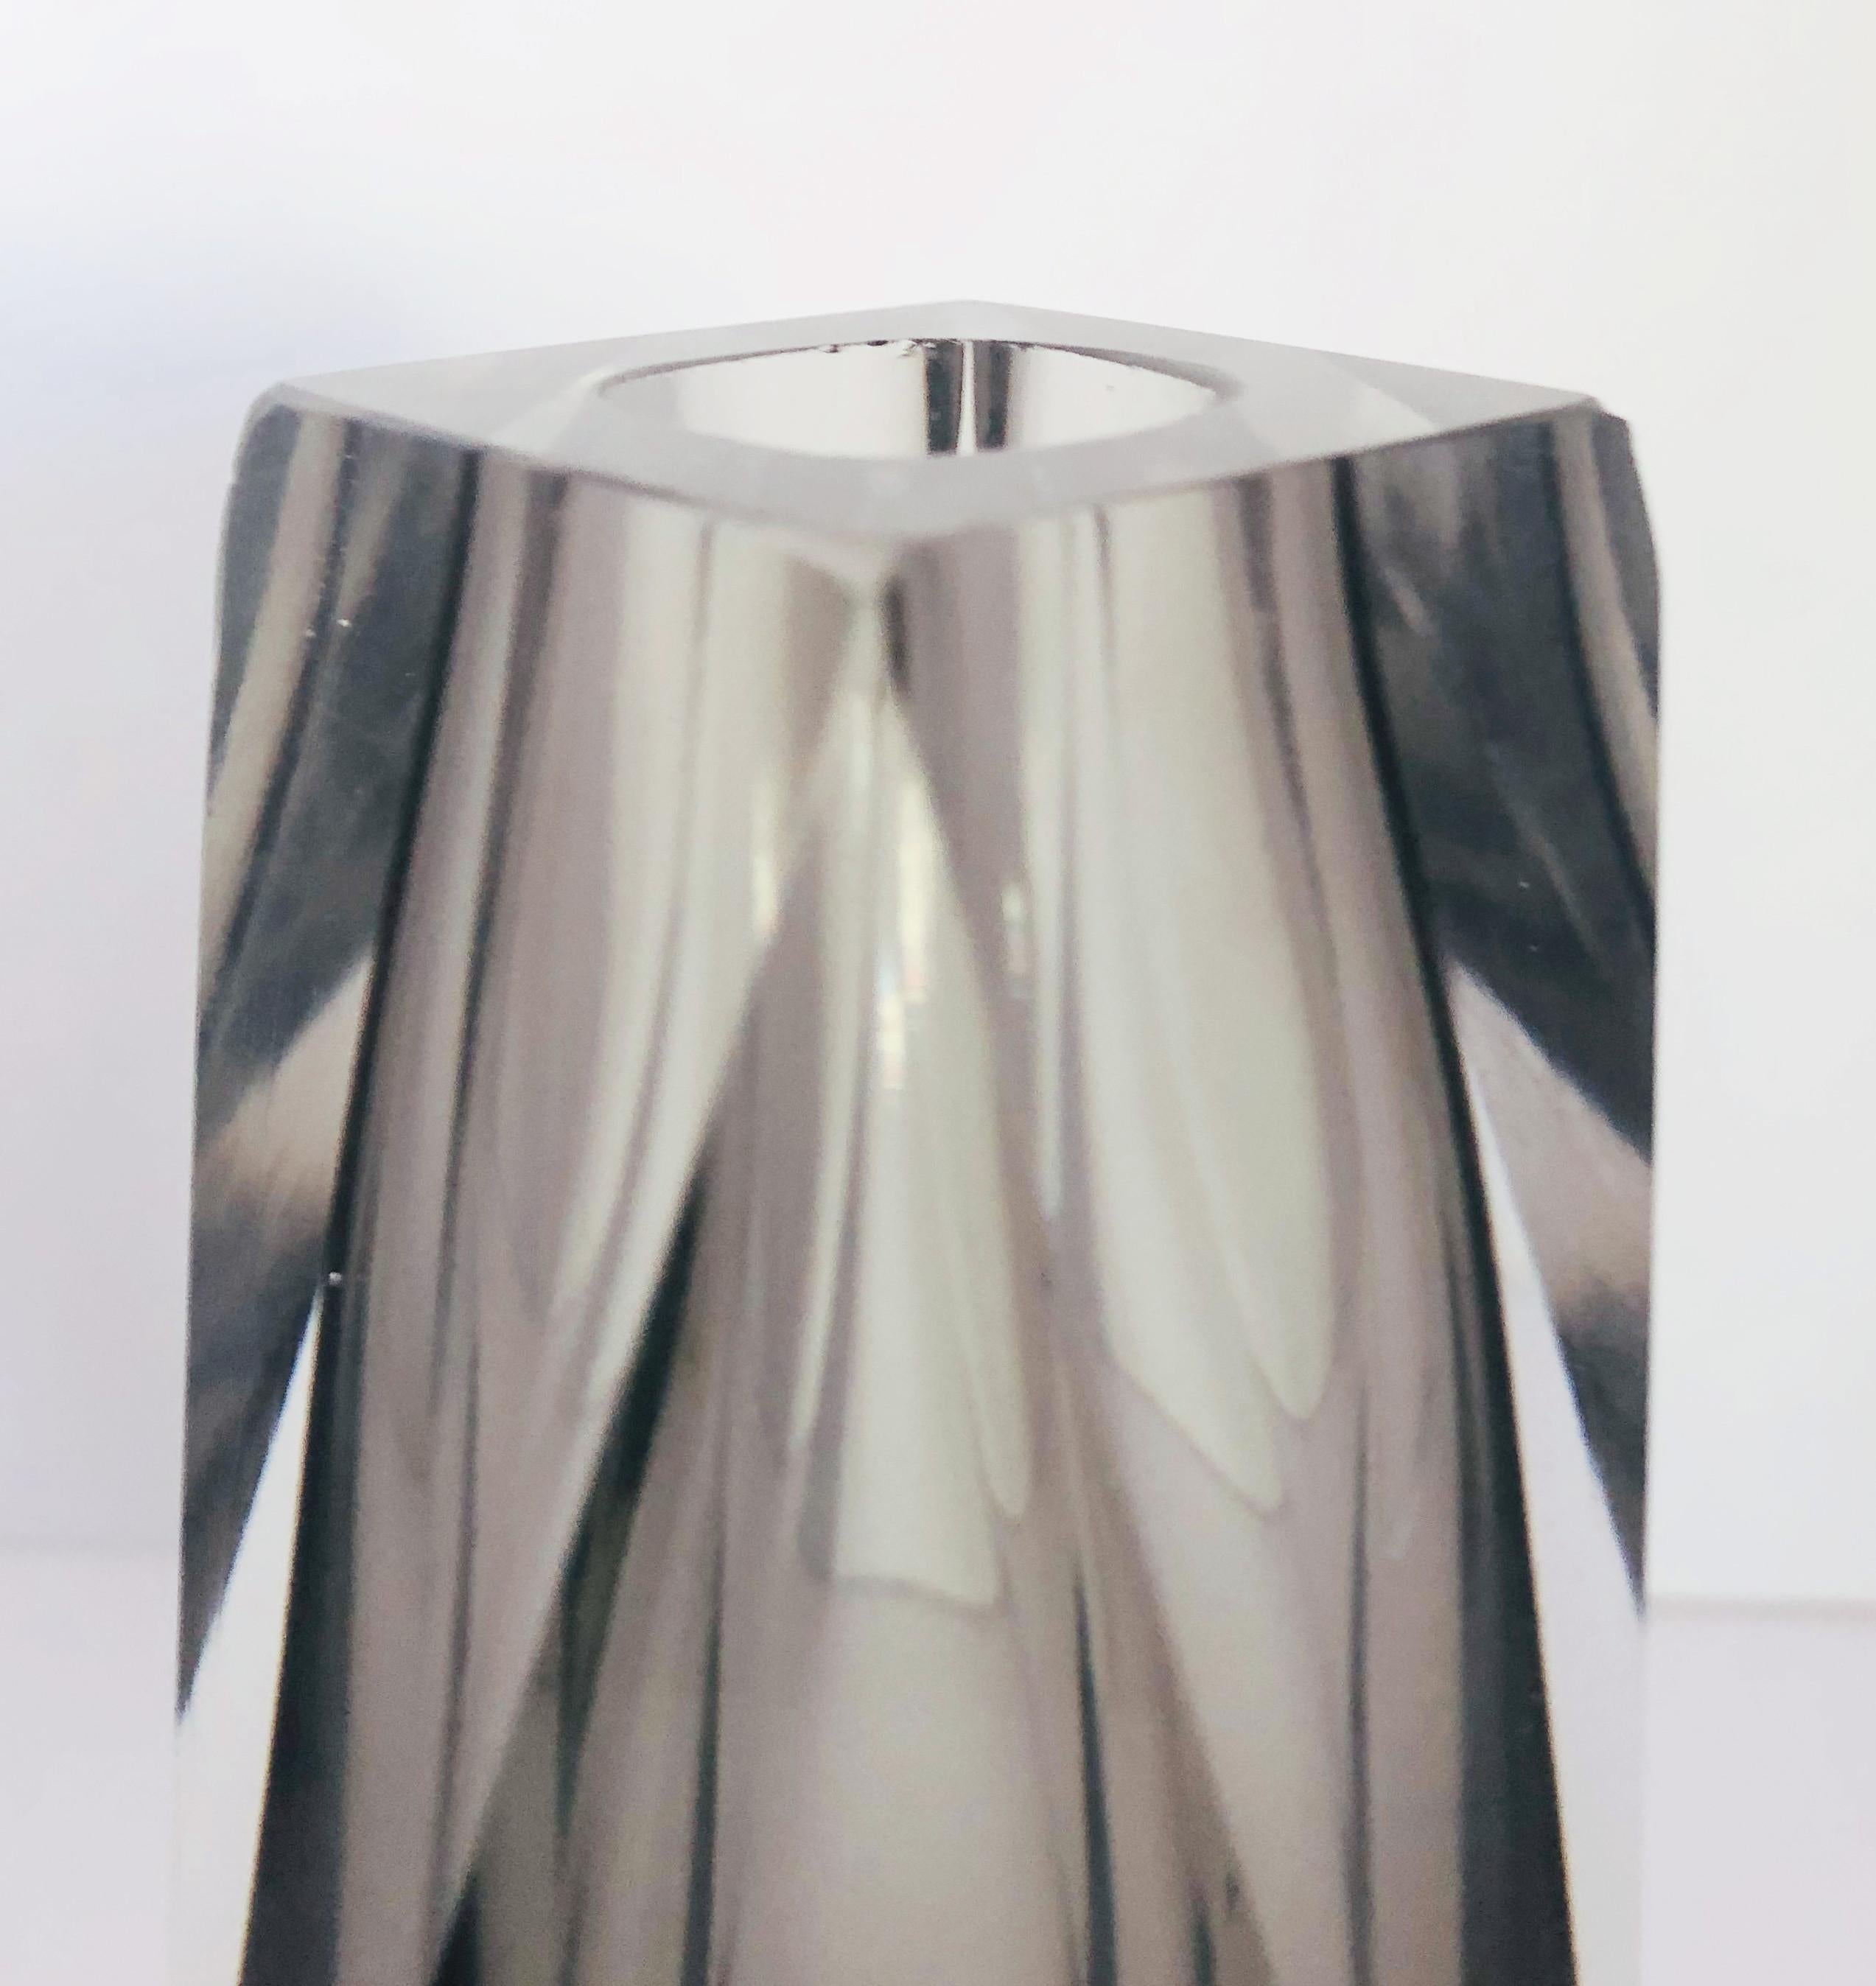 Murano Glass Smoky Faceted Sommerso Vase by Mandruzzato FINAL CLEARANCE SALE